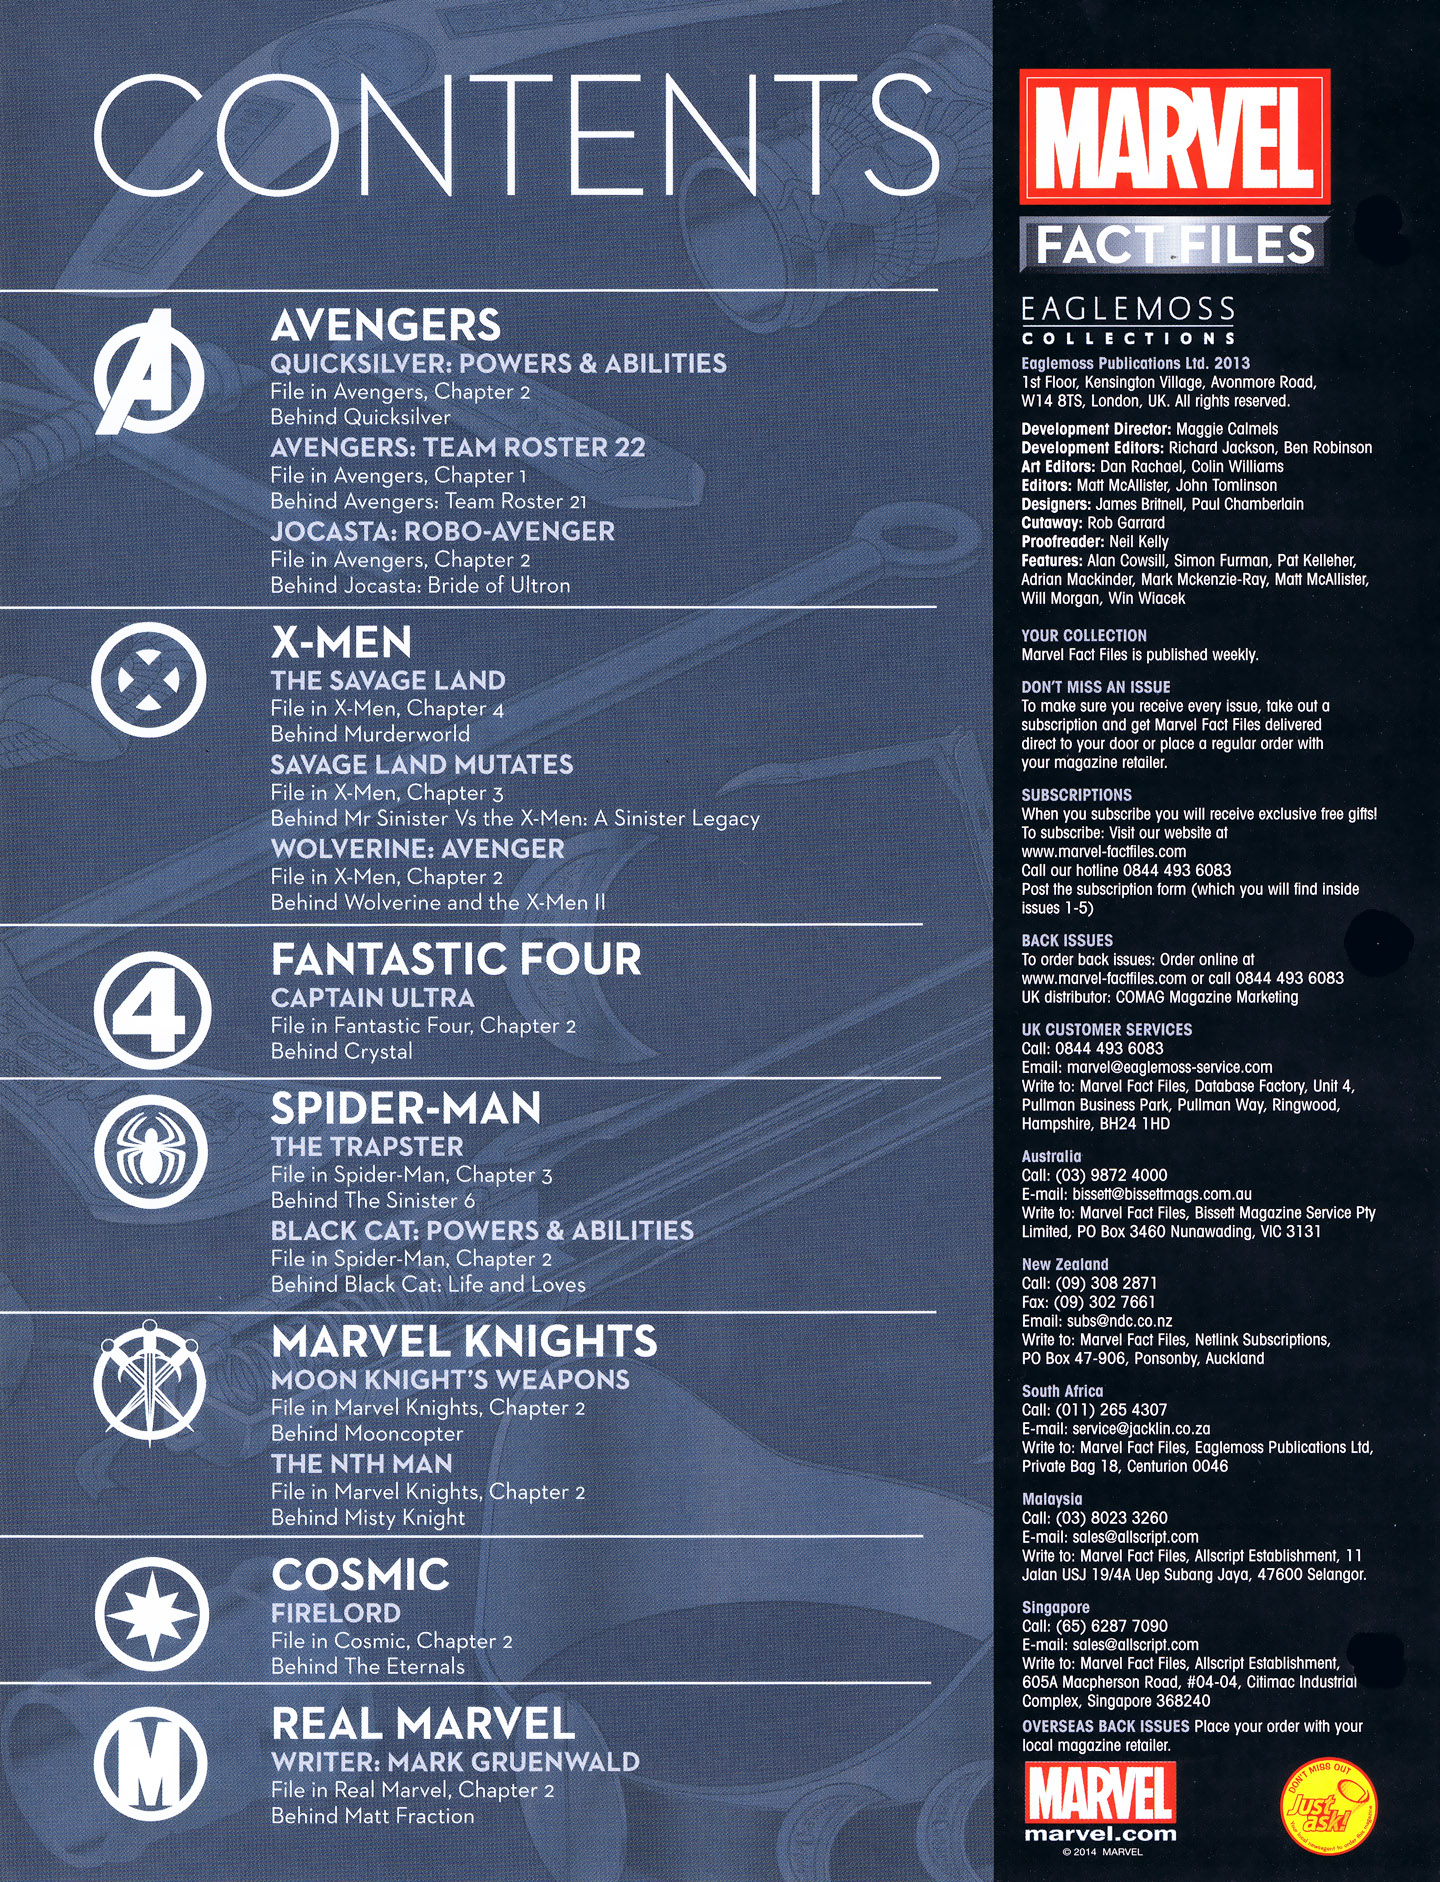 Read online Marvel Fact Files comic -  Issue #50 - 3